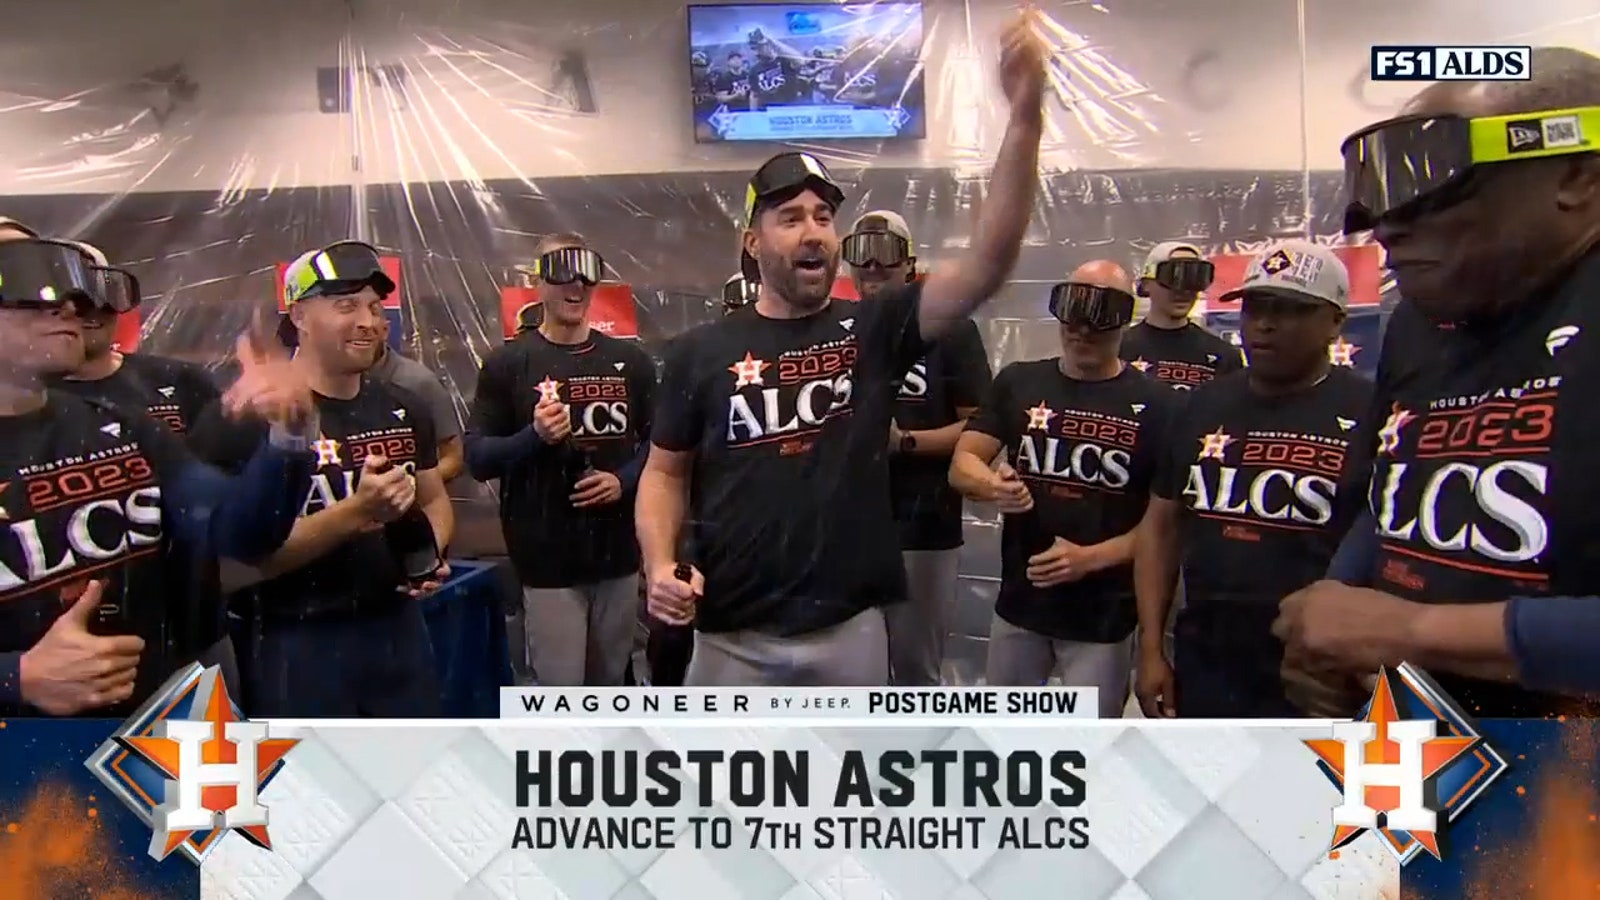 Justin Verlander gives an epic victory speech as Astros head to ALCS